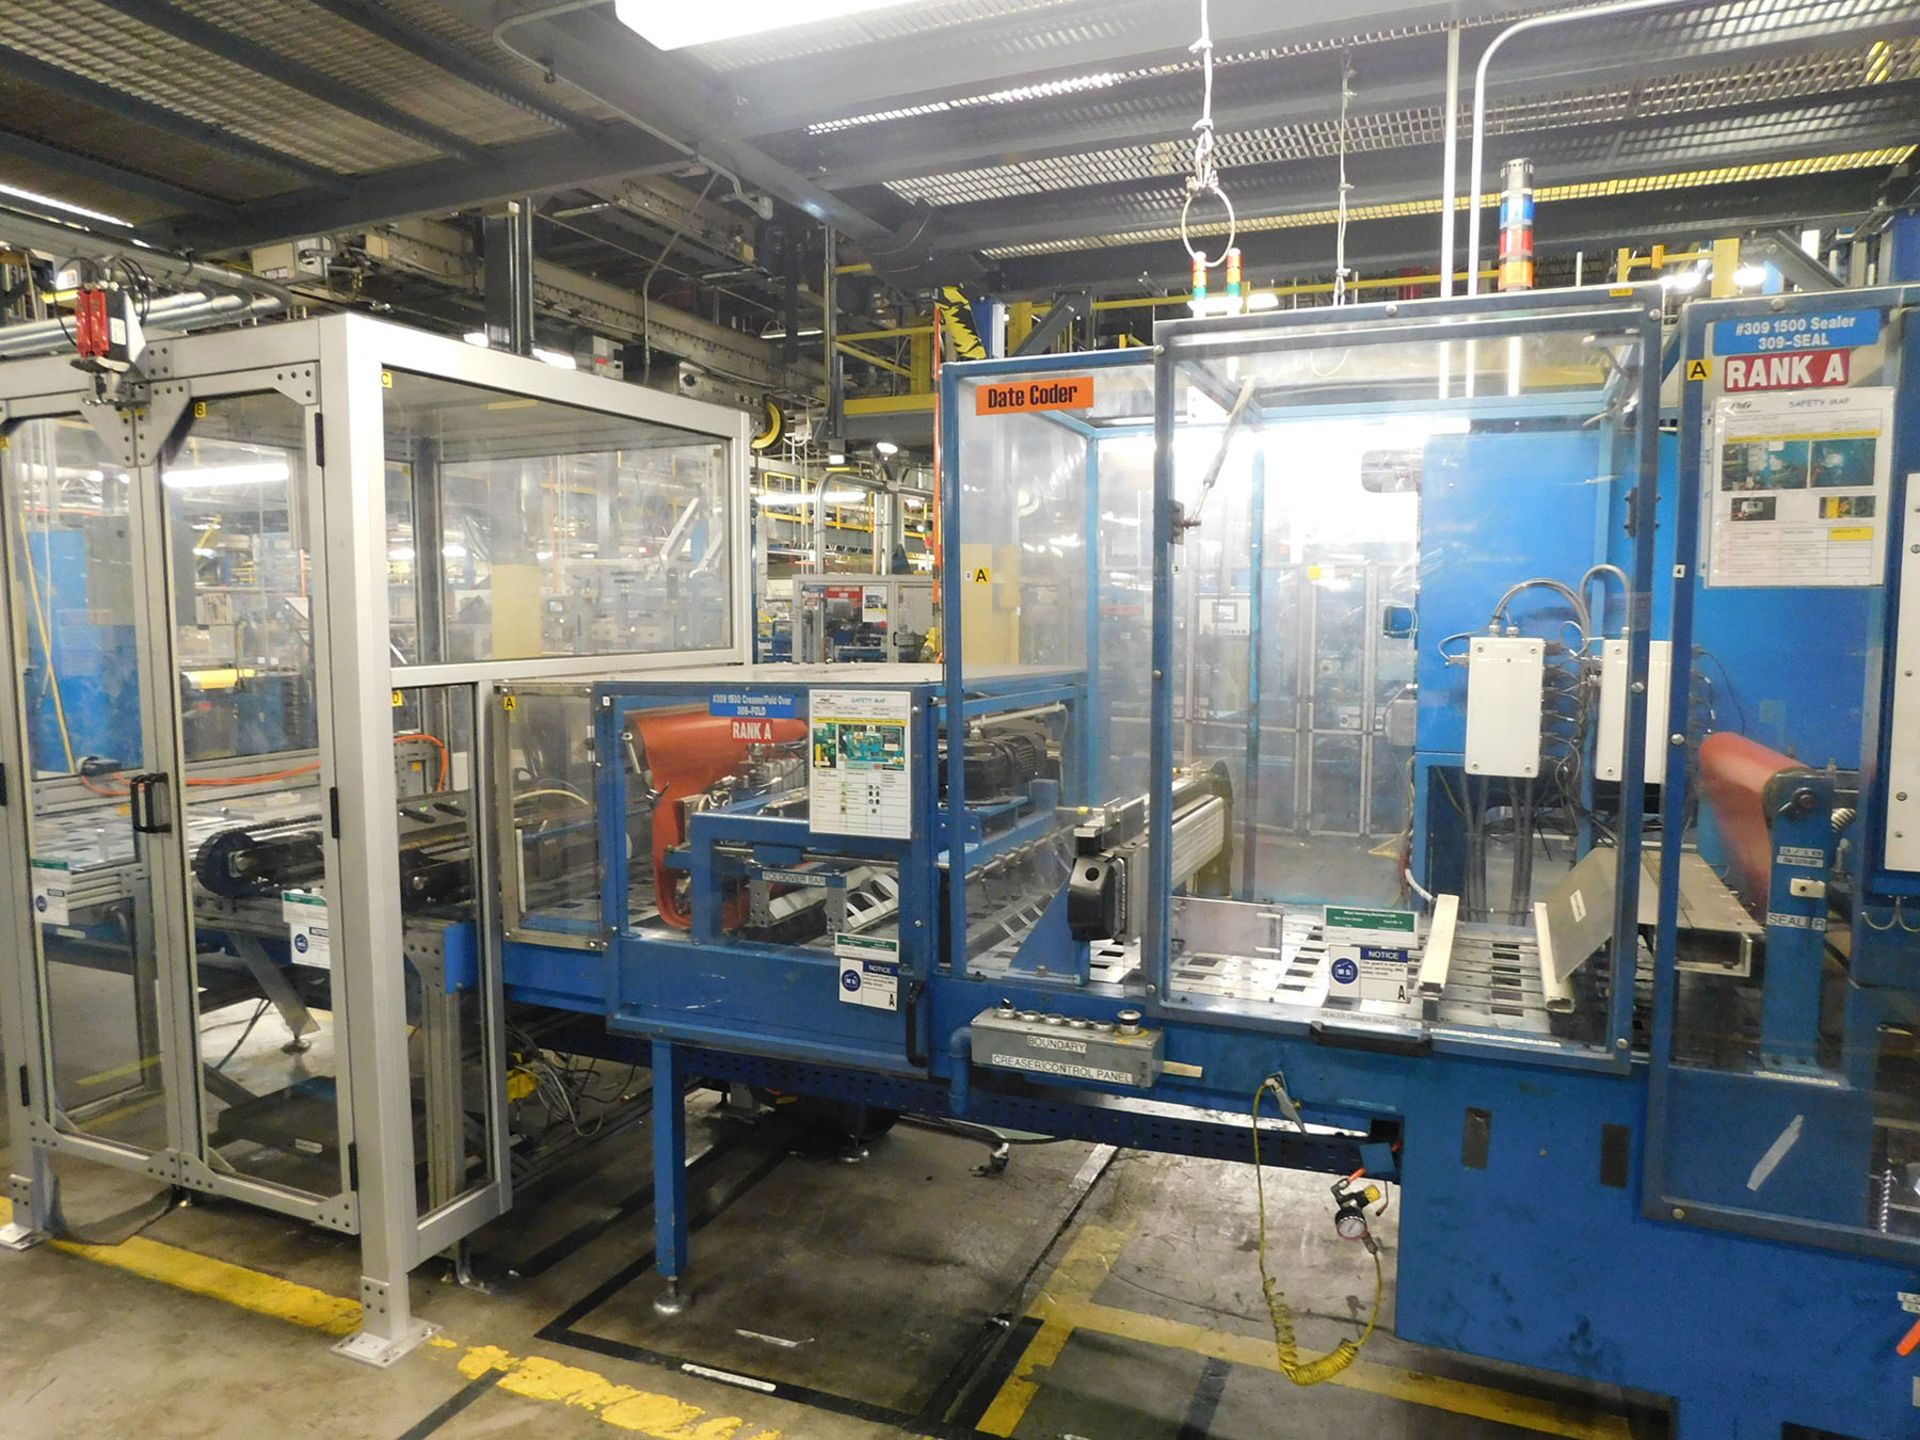 AA DURACELL BLISTER PACK LINE WITH FOLD OVER CASE LOADER, MOTORIZED ROLLER CONVEYOR AND ELEVATOR - Image 3 of 4